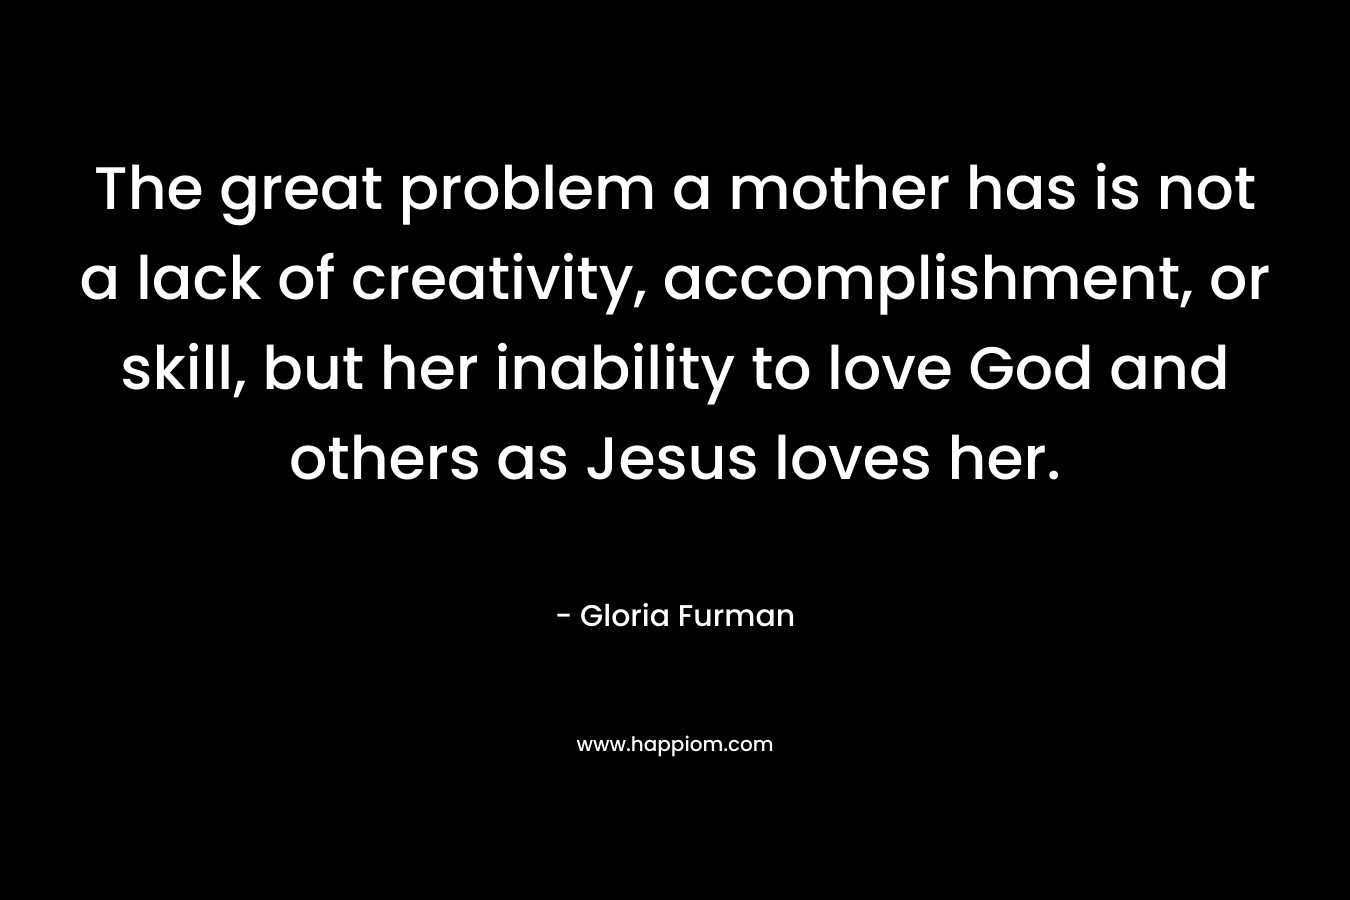 The great problem a mother has is not a lack of creativity, accomplishment, or skill, but her inability to love God and others as Jesus loves her. – Gloria Furman